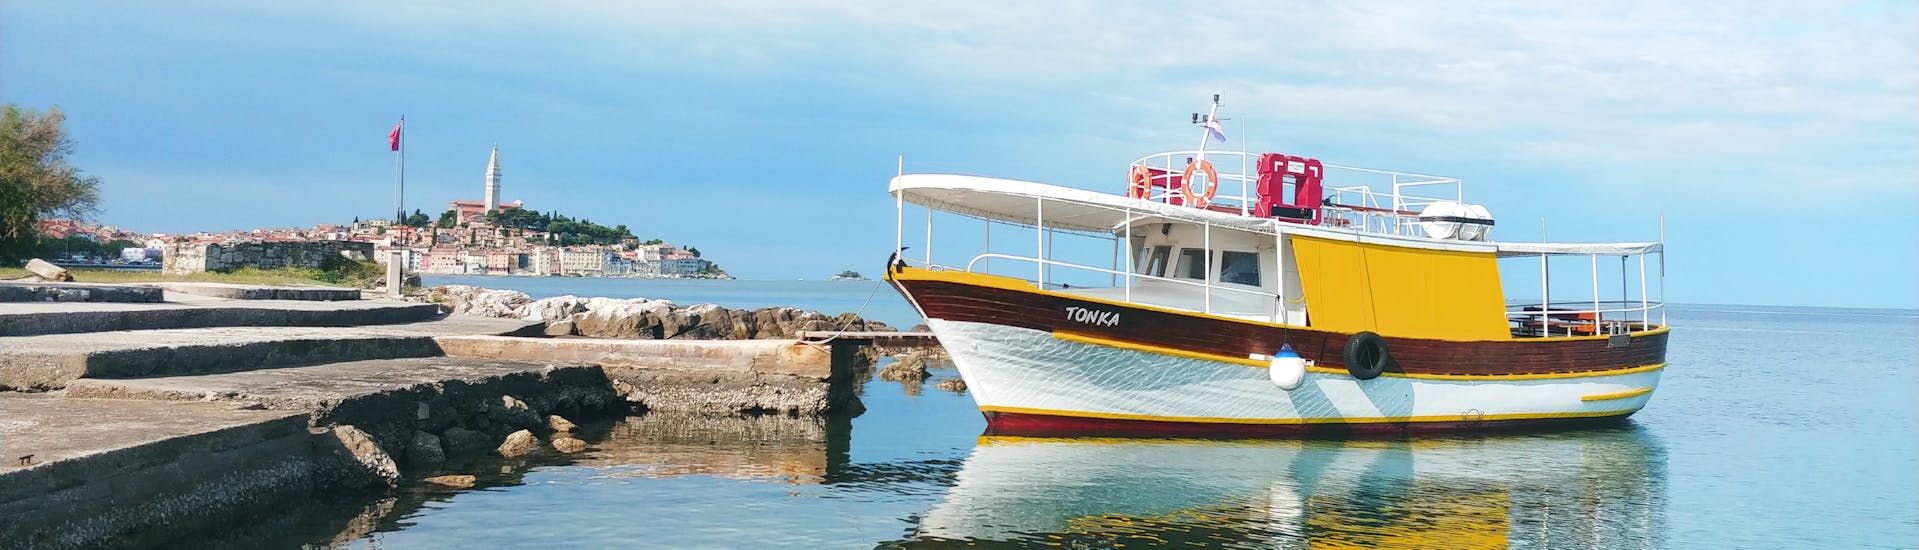 Picture of the boat called Tonka during the boat trip to Lim Fjord hosted by Boat Excursions Tonka Rovinj.